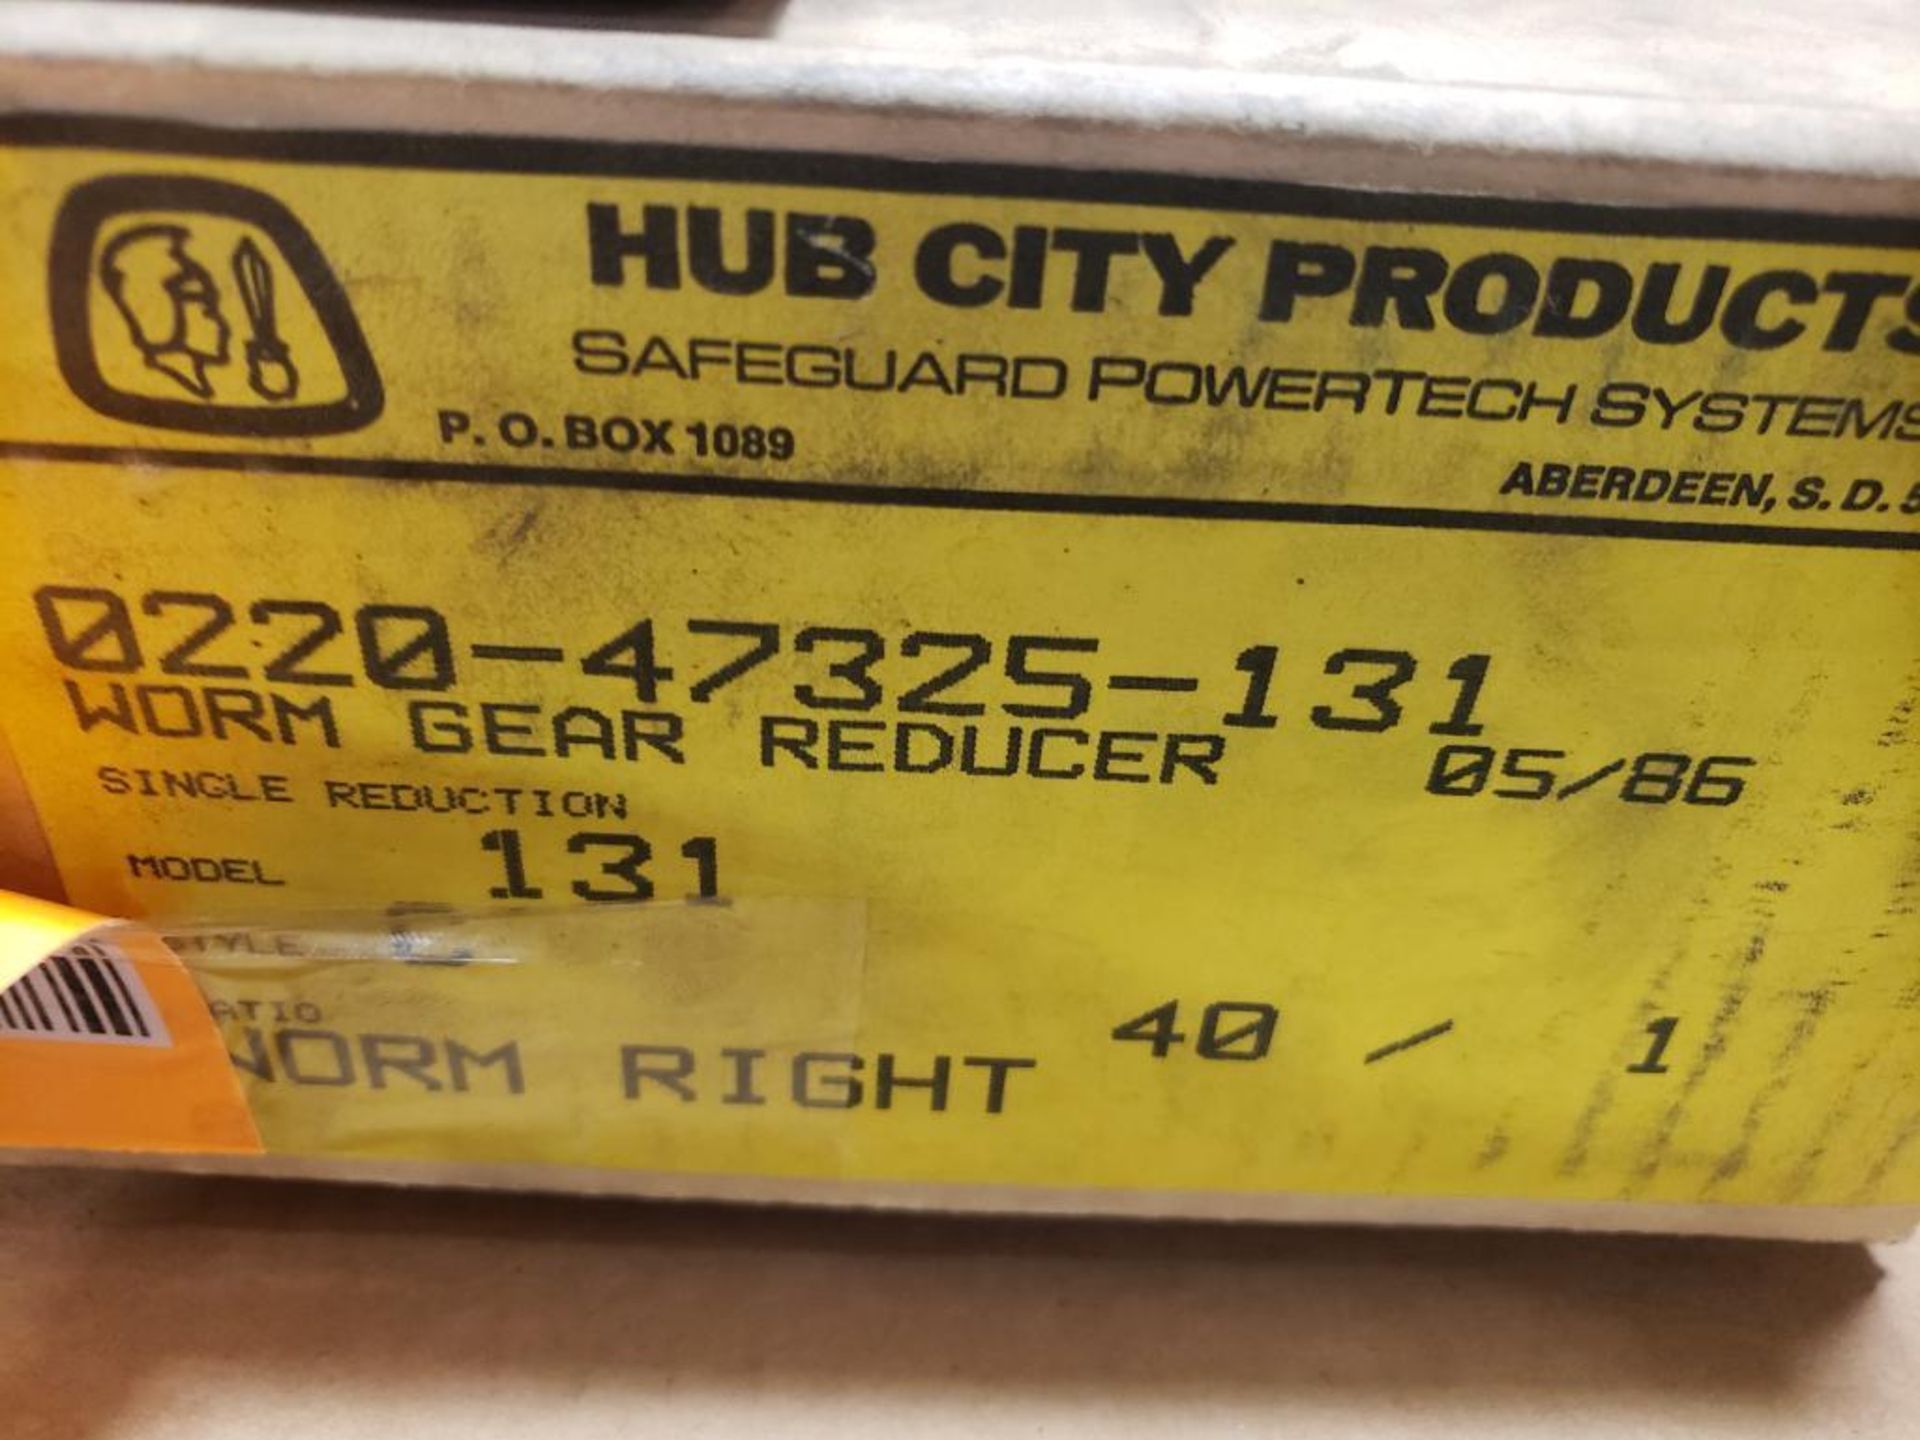 Hub City 0220-47325-131 Worm gear reducer 40:1-Ratio. New in box. - Image 3 of 3